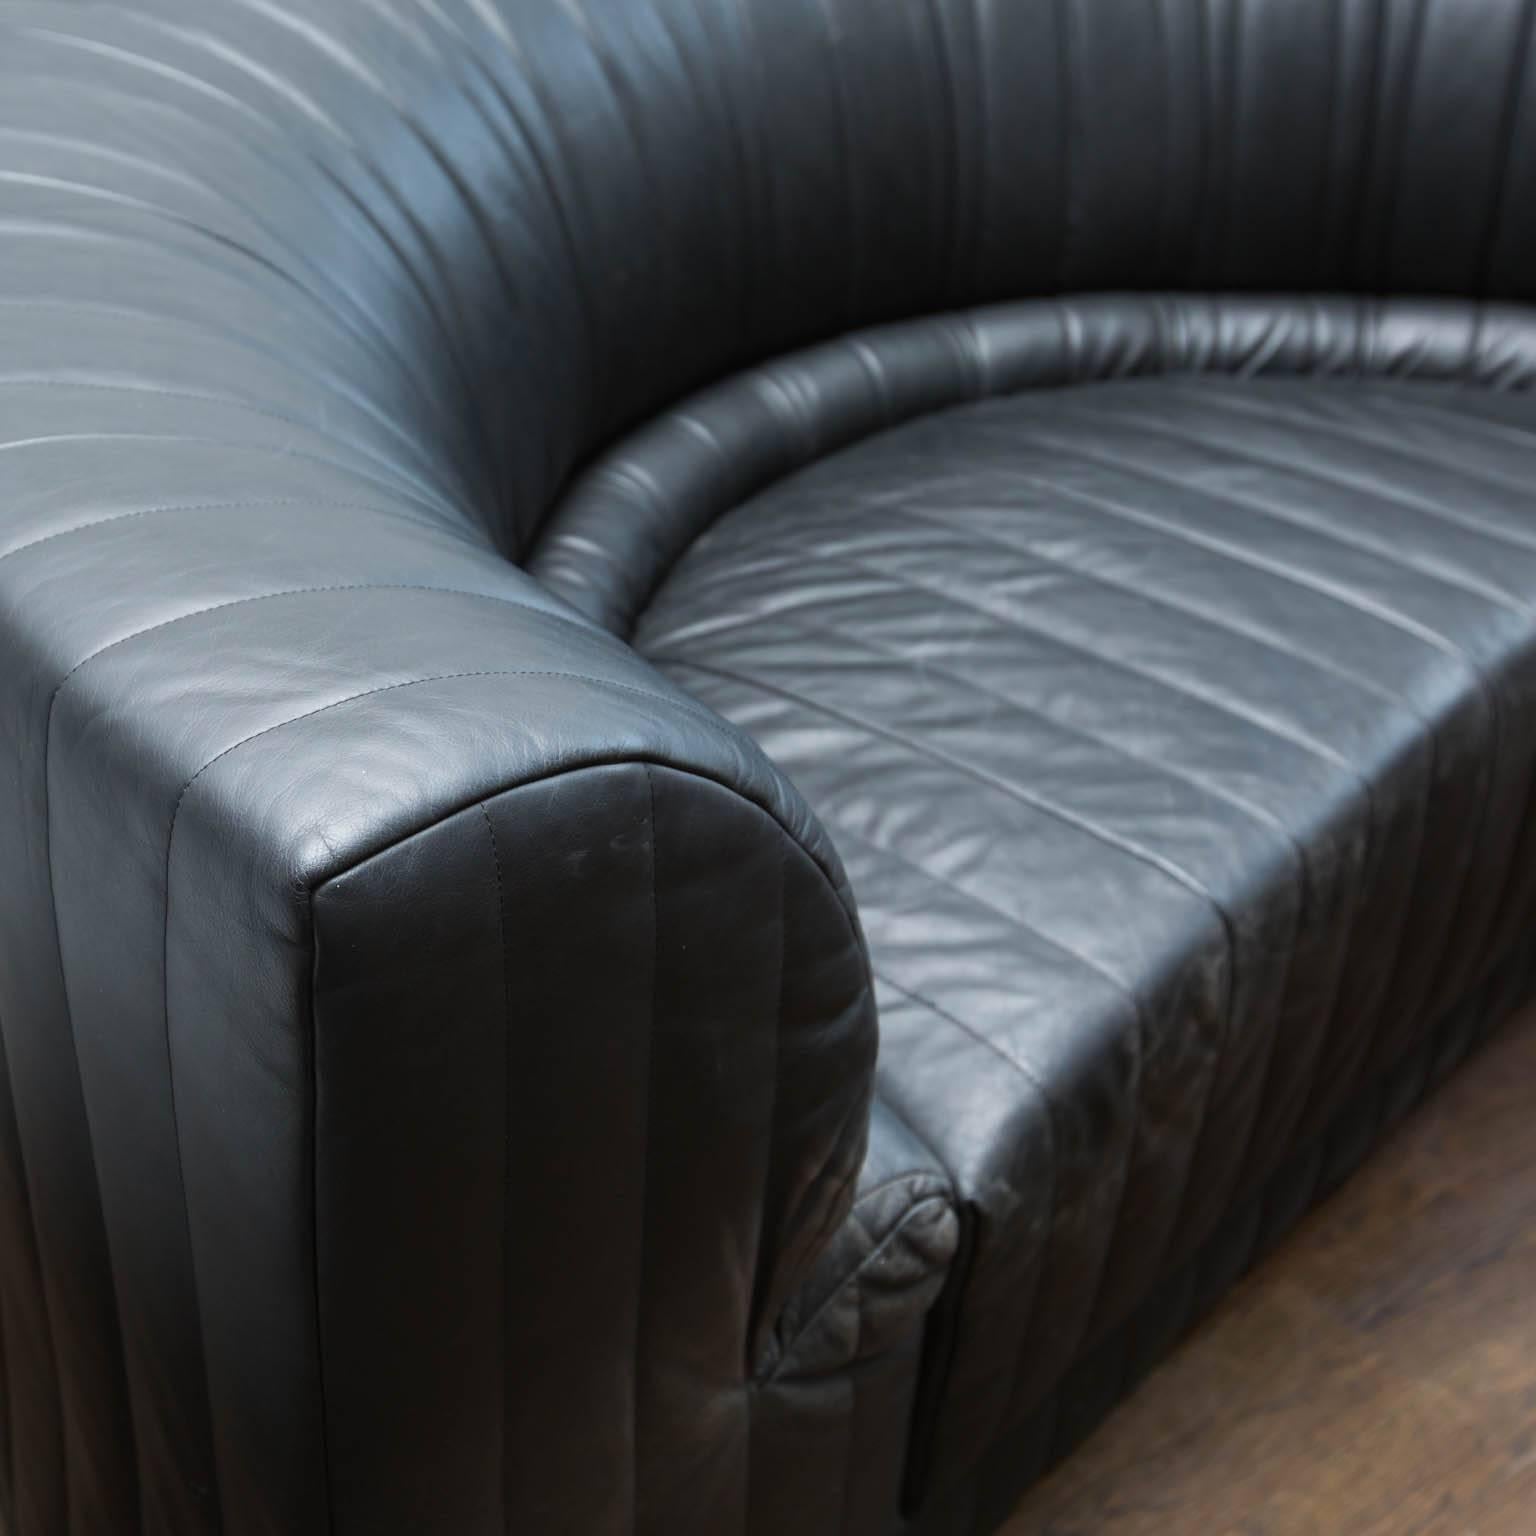 Modern concave shaped leather couch in very clean condition. No rips or scratches to leather. Leather is as soft and subtle as it was the day it was delivered.